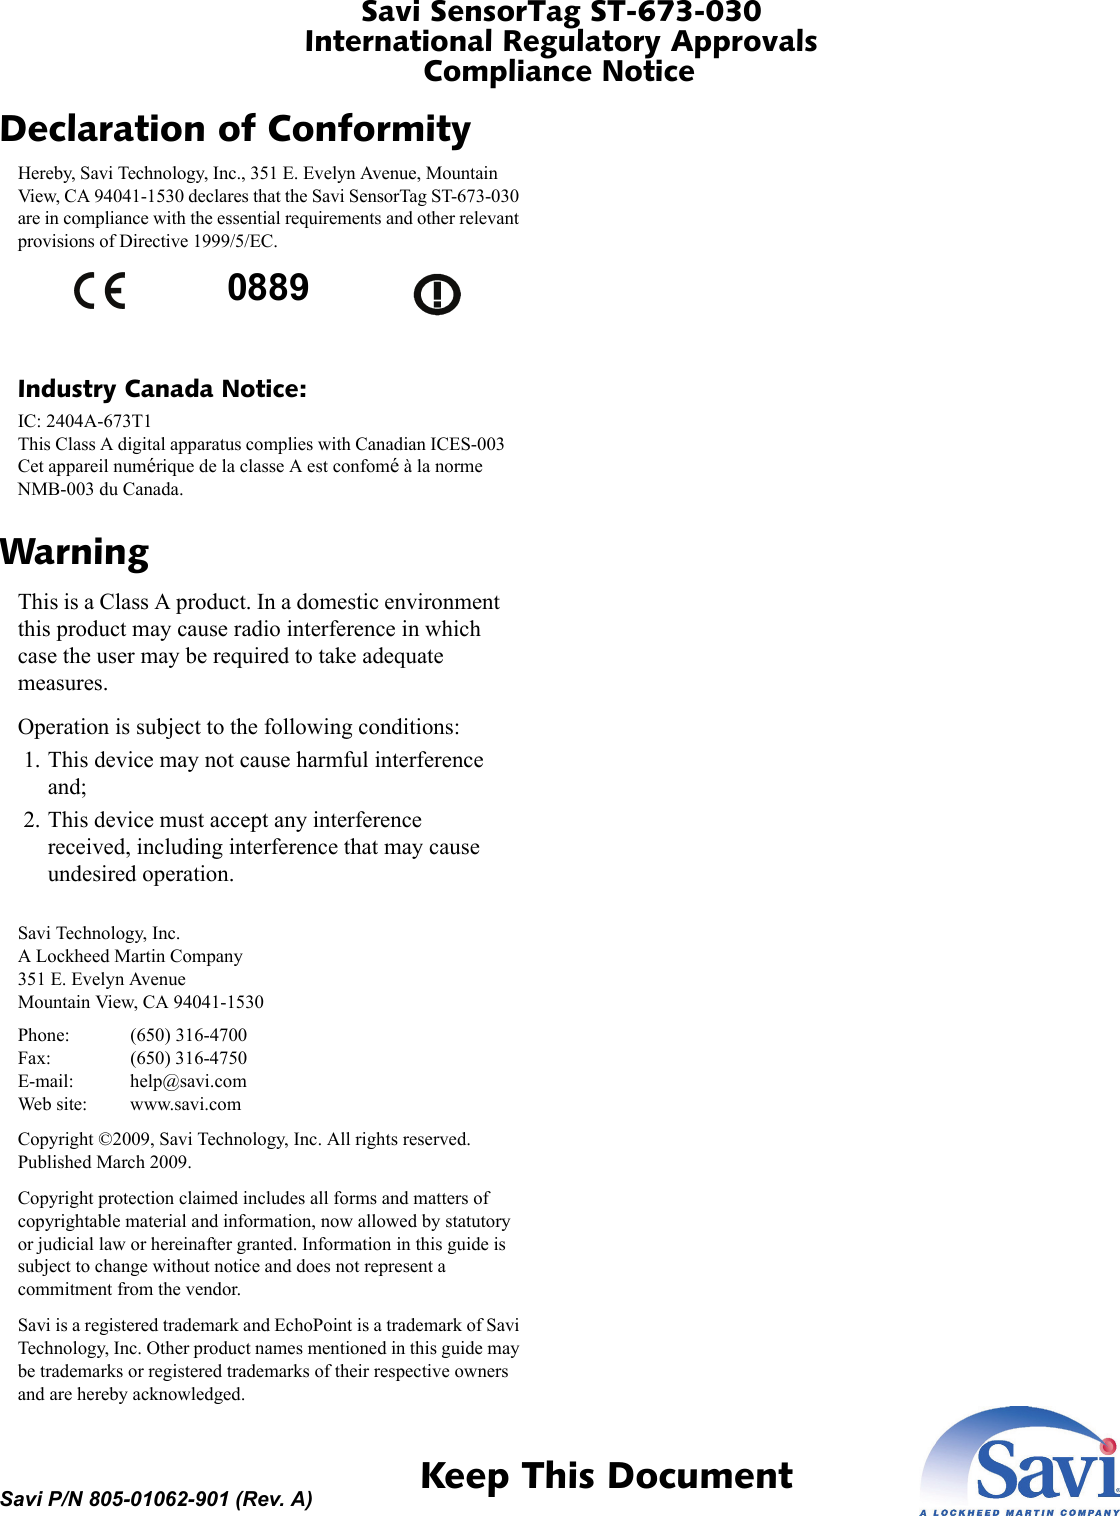 Savi SensorTag ST-673-030International Regulatory ApprovalsCompliance Notice 1  Keep This DocumentSavi P/N 805-01062-901 (Rev. A)Declaration of ConformityHereby, Savi Technology, Inc., 351 E. Evelyn Avenue, Mountain View, CA 94041-1530 declares that the Savi SensorTag ST-673-030 are in compliance with the essential requirements and other relevant provisions of Directive 1999/5/EC.Industry Canada Notice:IC: 2404A-673T1 This Class A digital apparatus complies with Canadian ICES-003 Cet appareil numérique de la classe A est confomé à la norme NMB-003 du Canada.WarningThis is a Class A product. In a domestic environment this product may cause radio interference in which case the user may be required to take adequate measures.Operation is subject to the following conditions: 1. This device may not cause harmful interference and; 2. This device must accept any interference received, including interference that may cause undesired operation.Savi Technology, Inc. A Lockheed Martin Company 351 E. Evelyn Avenue Mountain View, CA 94041-1530Phone: (650) 316-4700 Fax: (650) 316-4750 E-mail: help@savi.com Web site: www.savi.comCopyright ©2009, Savi Technology, Inc. All rights reserved. Published March 2009.Copyright protection claimed includes all forms and matters of copyrightable material and information, now allowed by statutory or judicial law or hereinafter granted. Information in this guide is subject to change without notice and does not represent a commitment from the vendor.Savi is a registered trademark and EchoPoint is a trademark of Savi Technology, Inc. Other product names mentioned in this guide may be trademarks or registered trademarks of their respective owners and are hereby acknowledged.0889